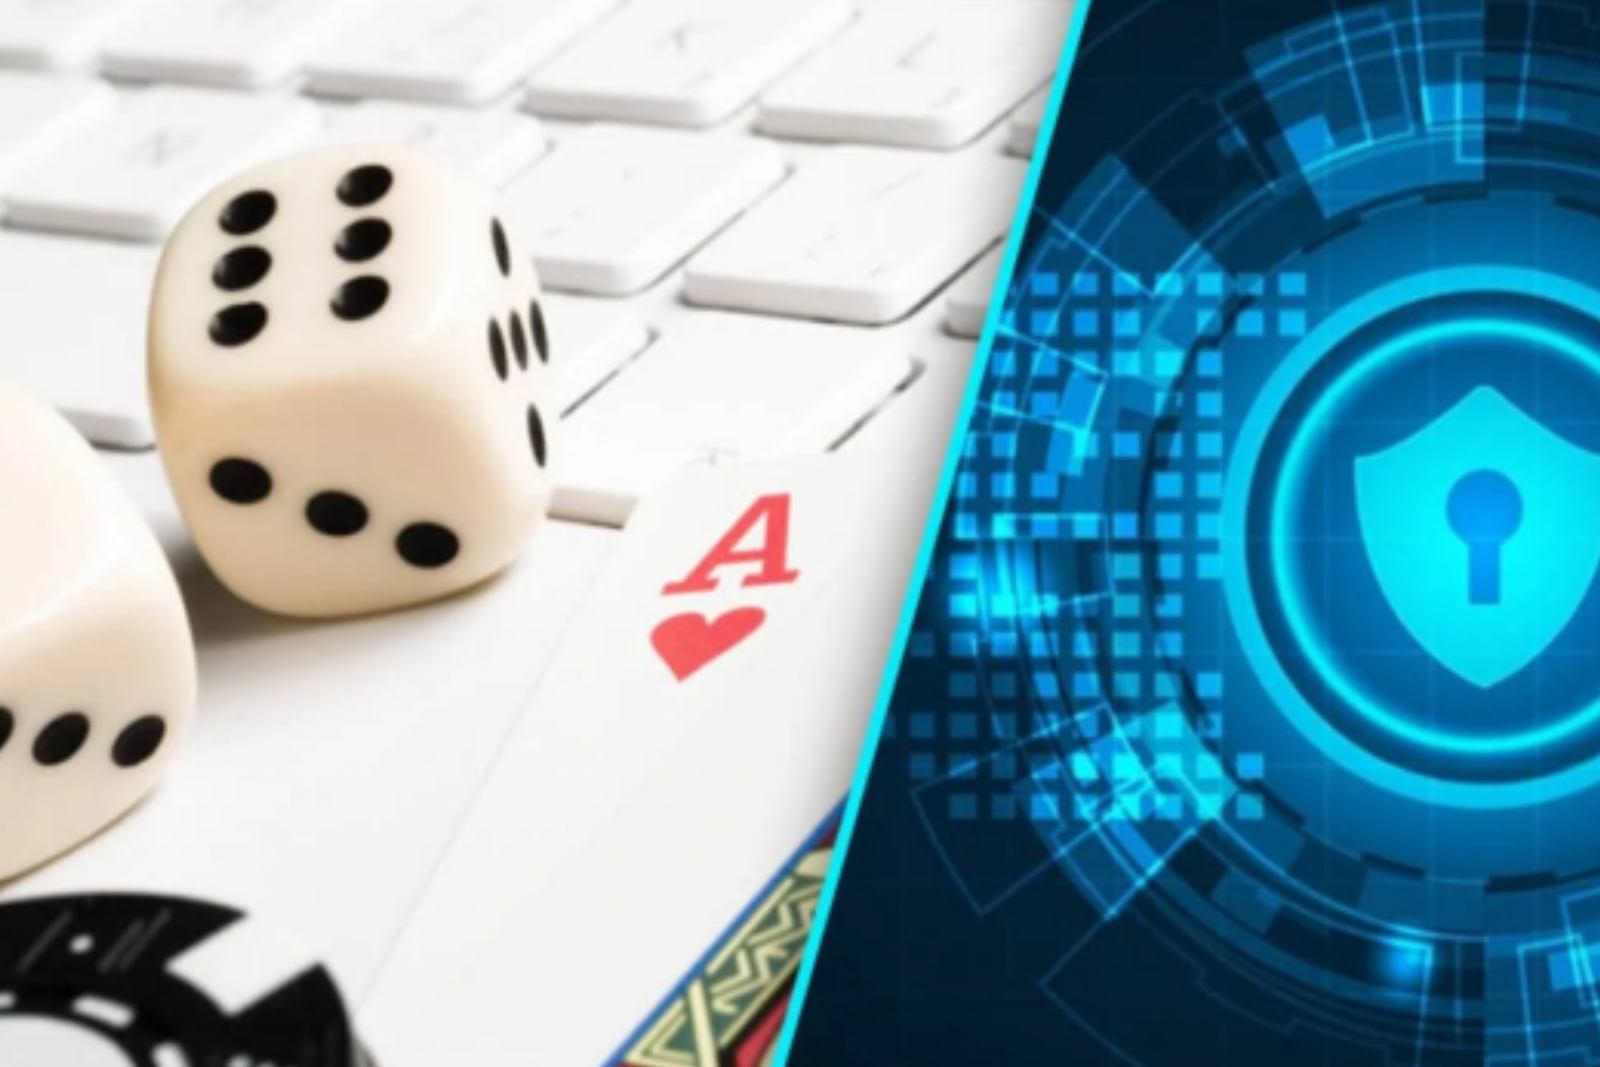 Online Casino Security: A Factor Essential For Carefree Fun